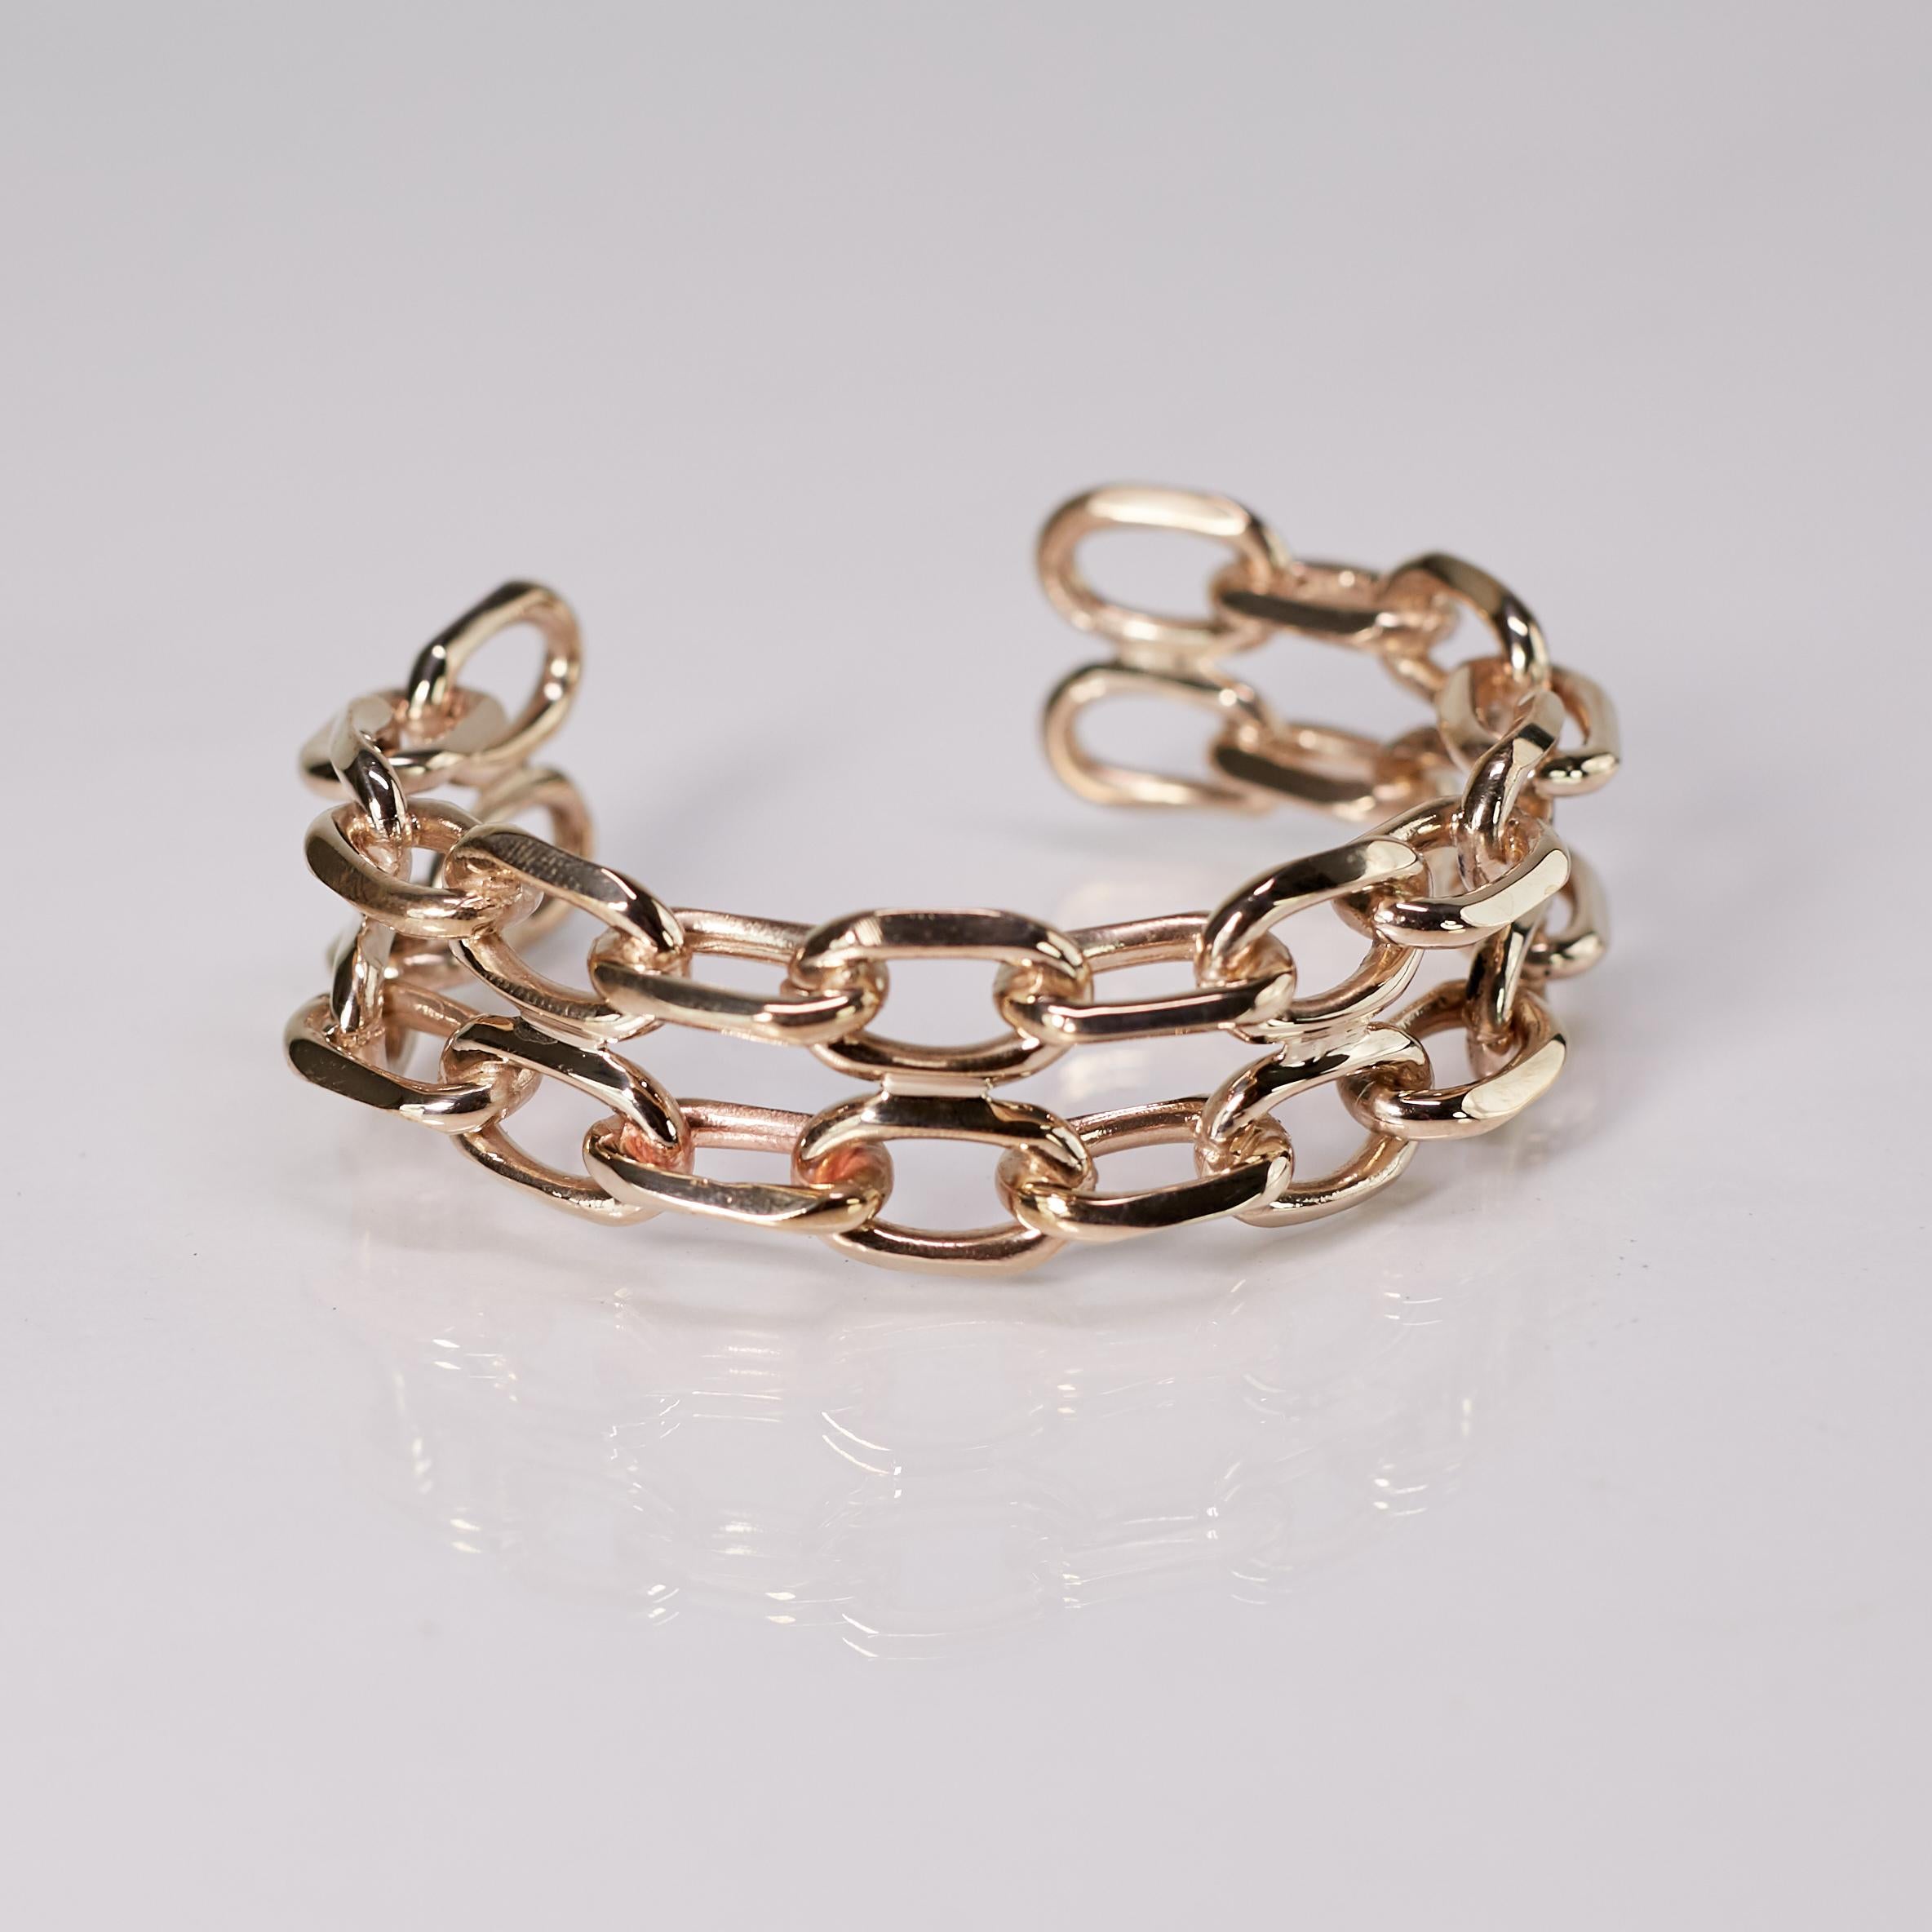 Chain Cuff Bangle Bracelet Gold Plated Brass Statement Piece J Dauphin In New Condition For Sale In Los Angeles, CA